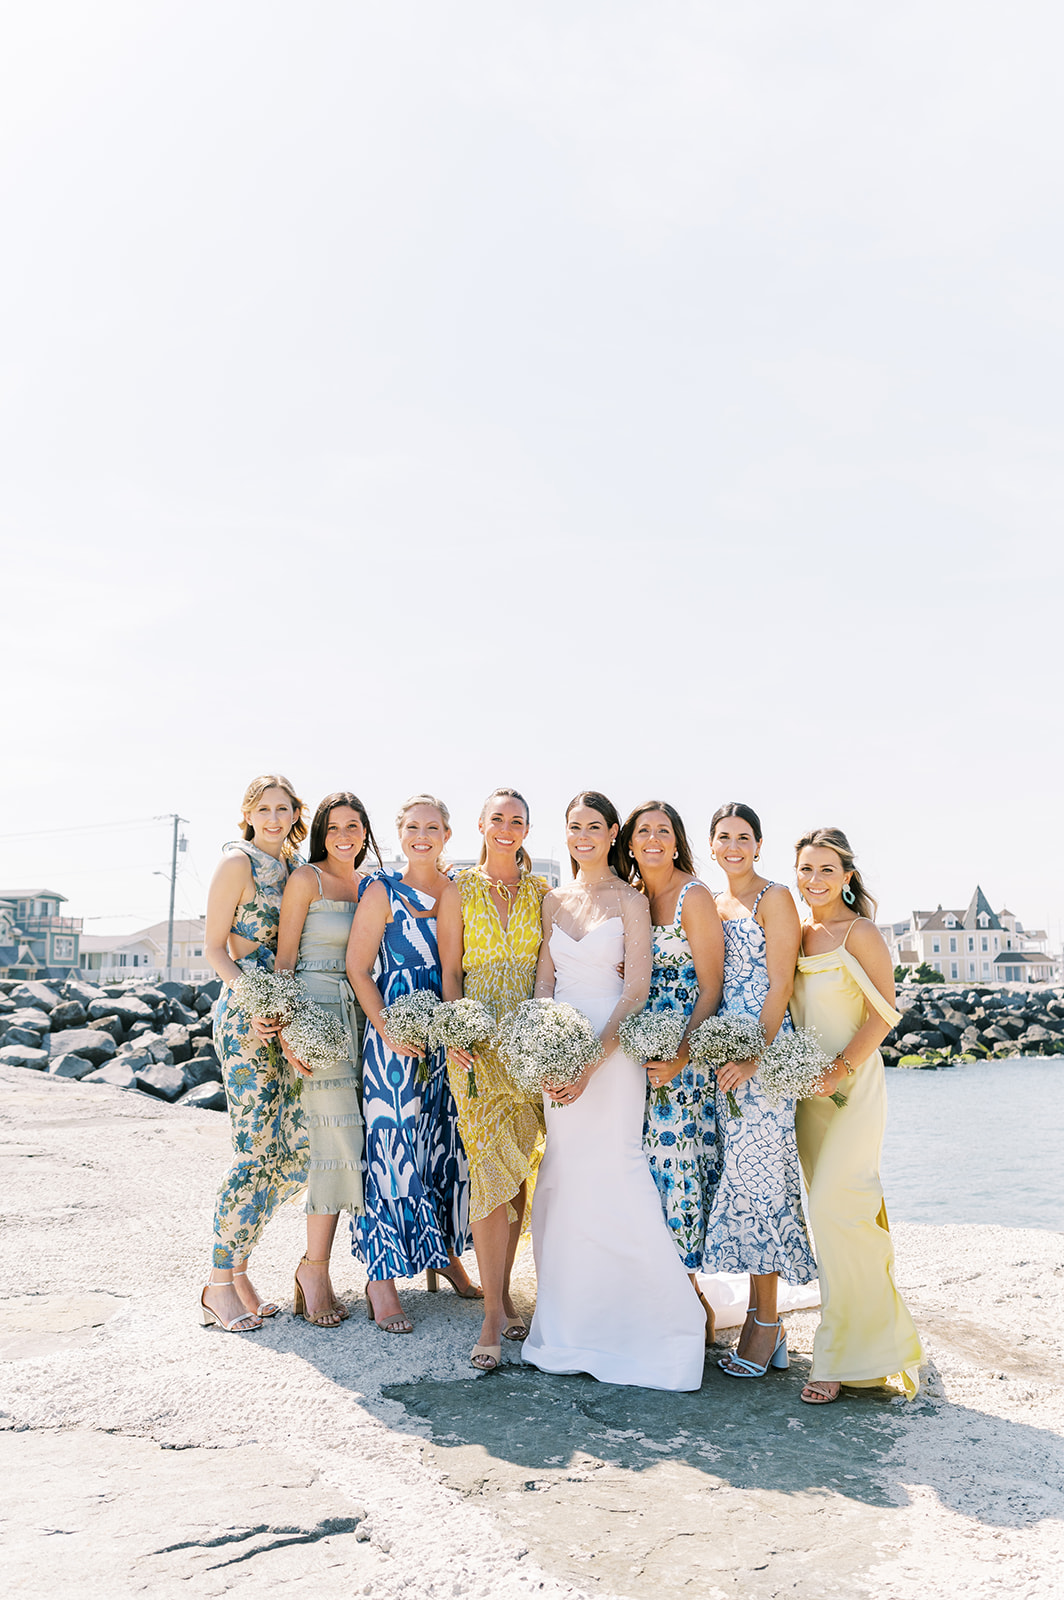 chic bridal party in preppy mismatched florals for Bright Summer Stone Harbor Golf Club Wedding in Yellow and Blue